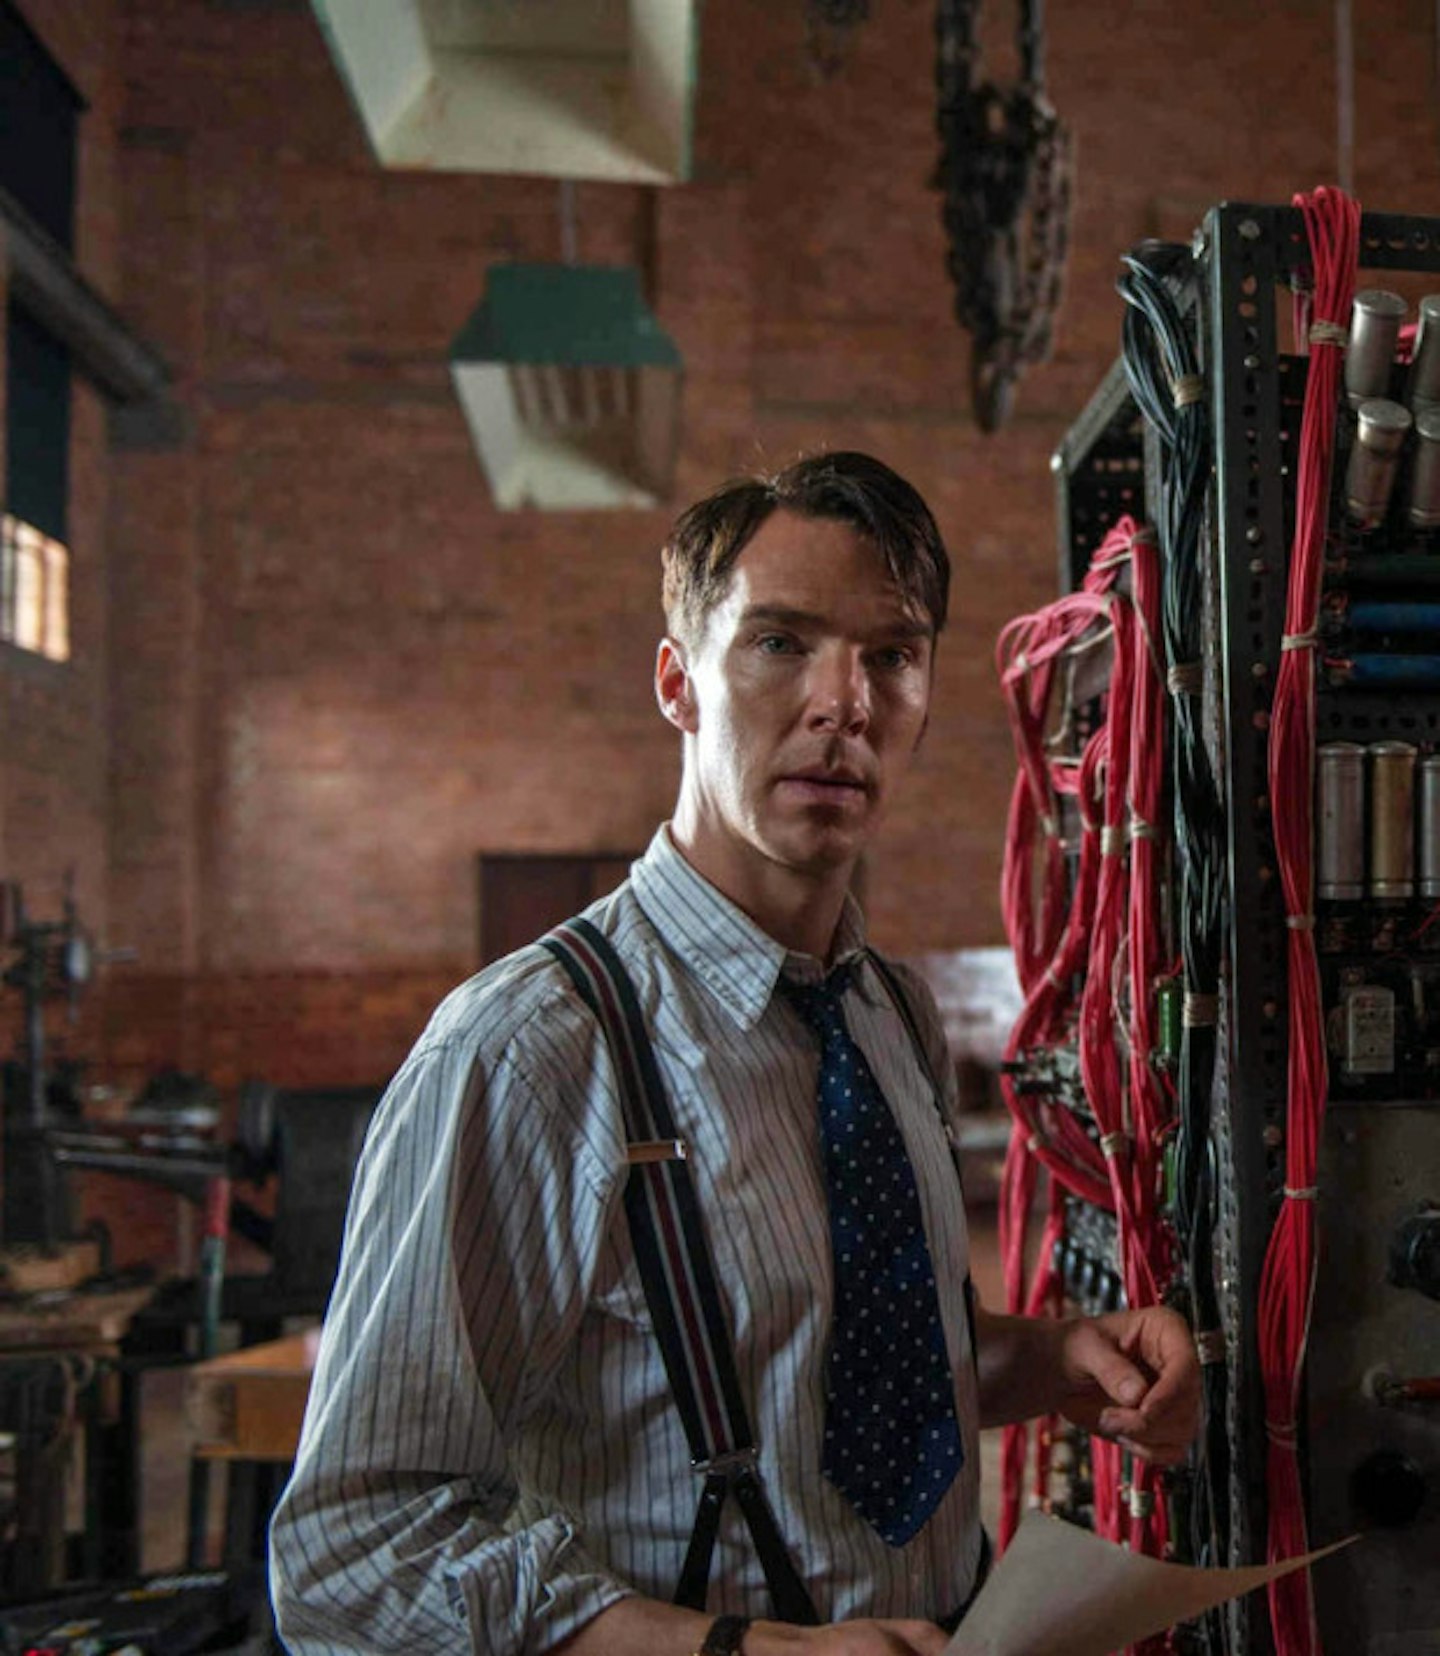 Best Adapted Screenplay winner: The Imitation Game!